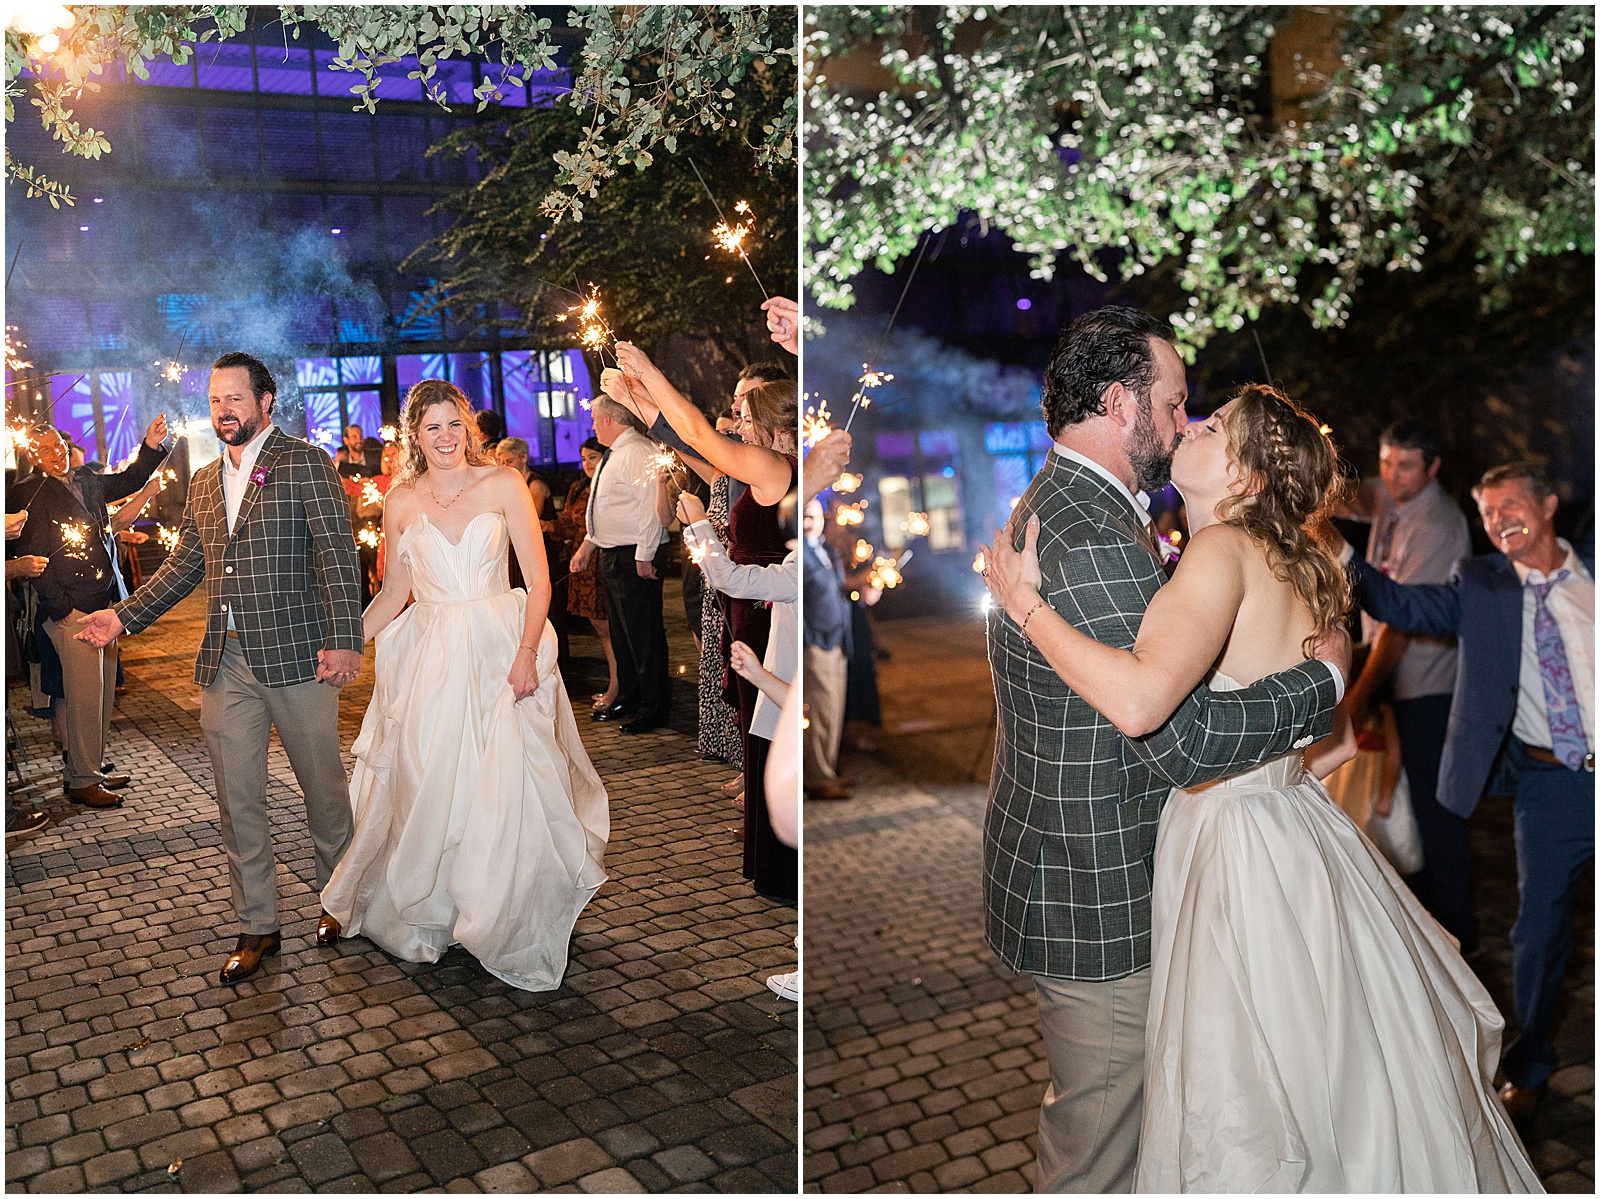 Grand Exit at Houston Museum of Natural Science Wedding Reception | Swish and Click Photography with Peachy Events